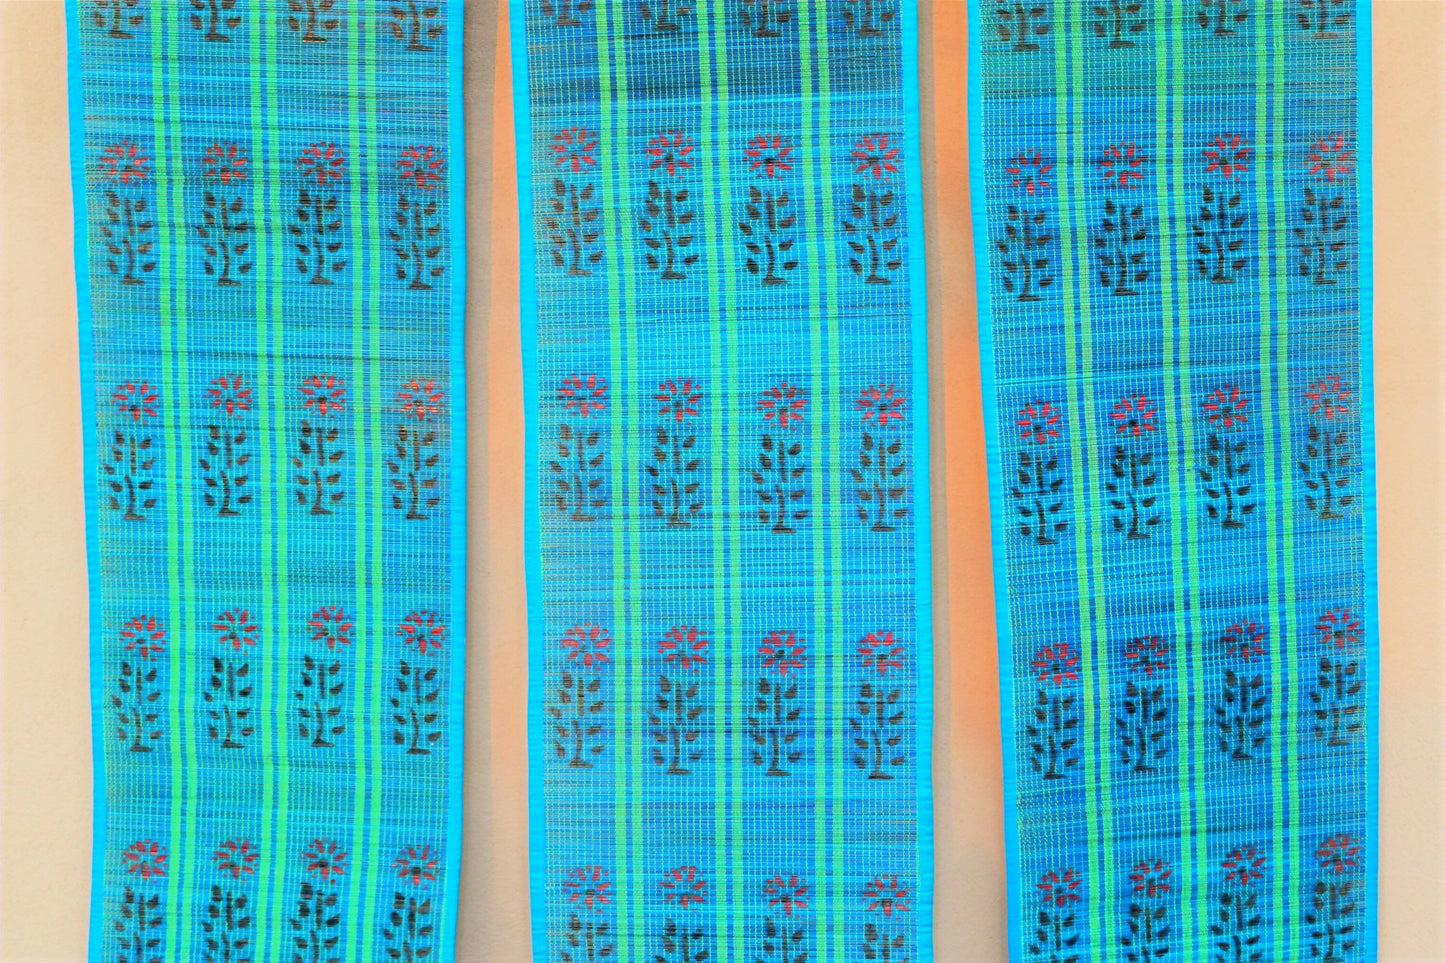 3 PANEL BAMBOO CURTAINS BLUE